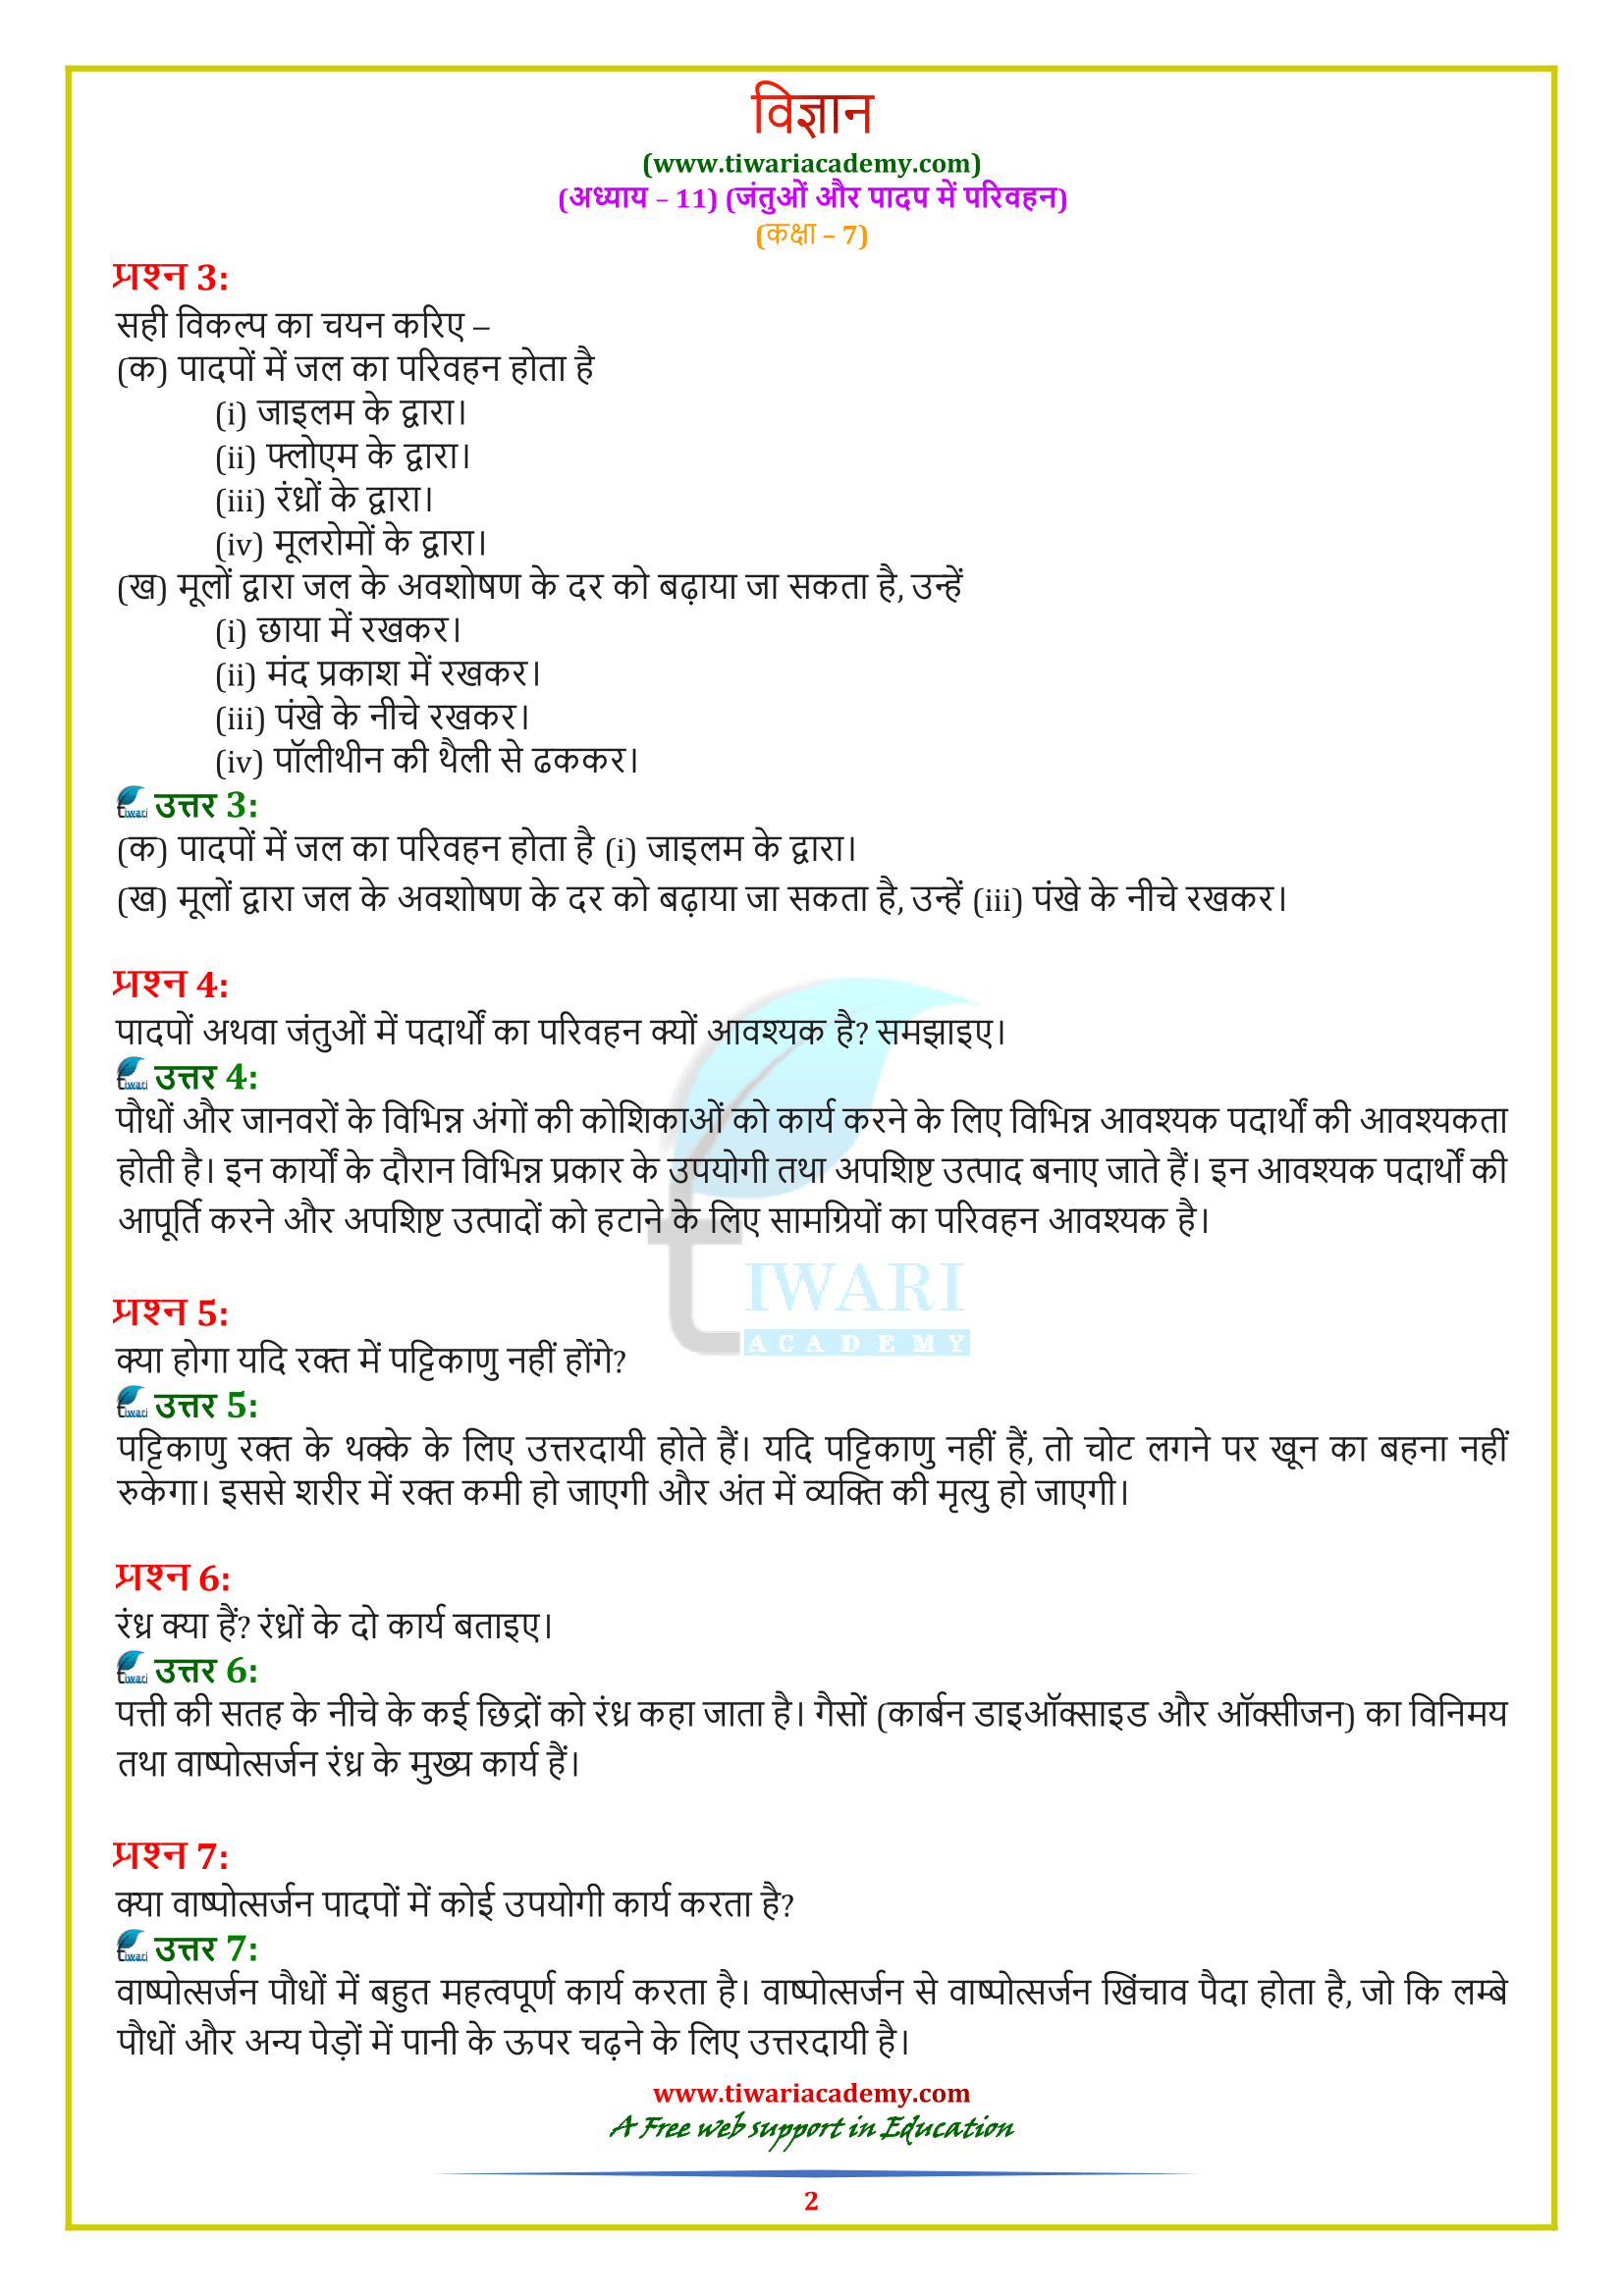 NCERT Solutions for Class 7 Science Chapter 11 in PDF for 2022-2023.